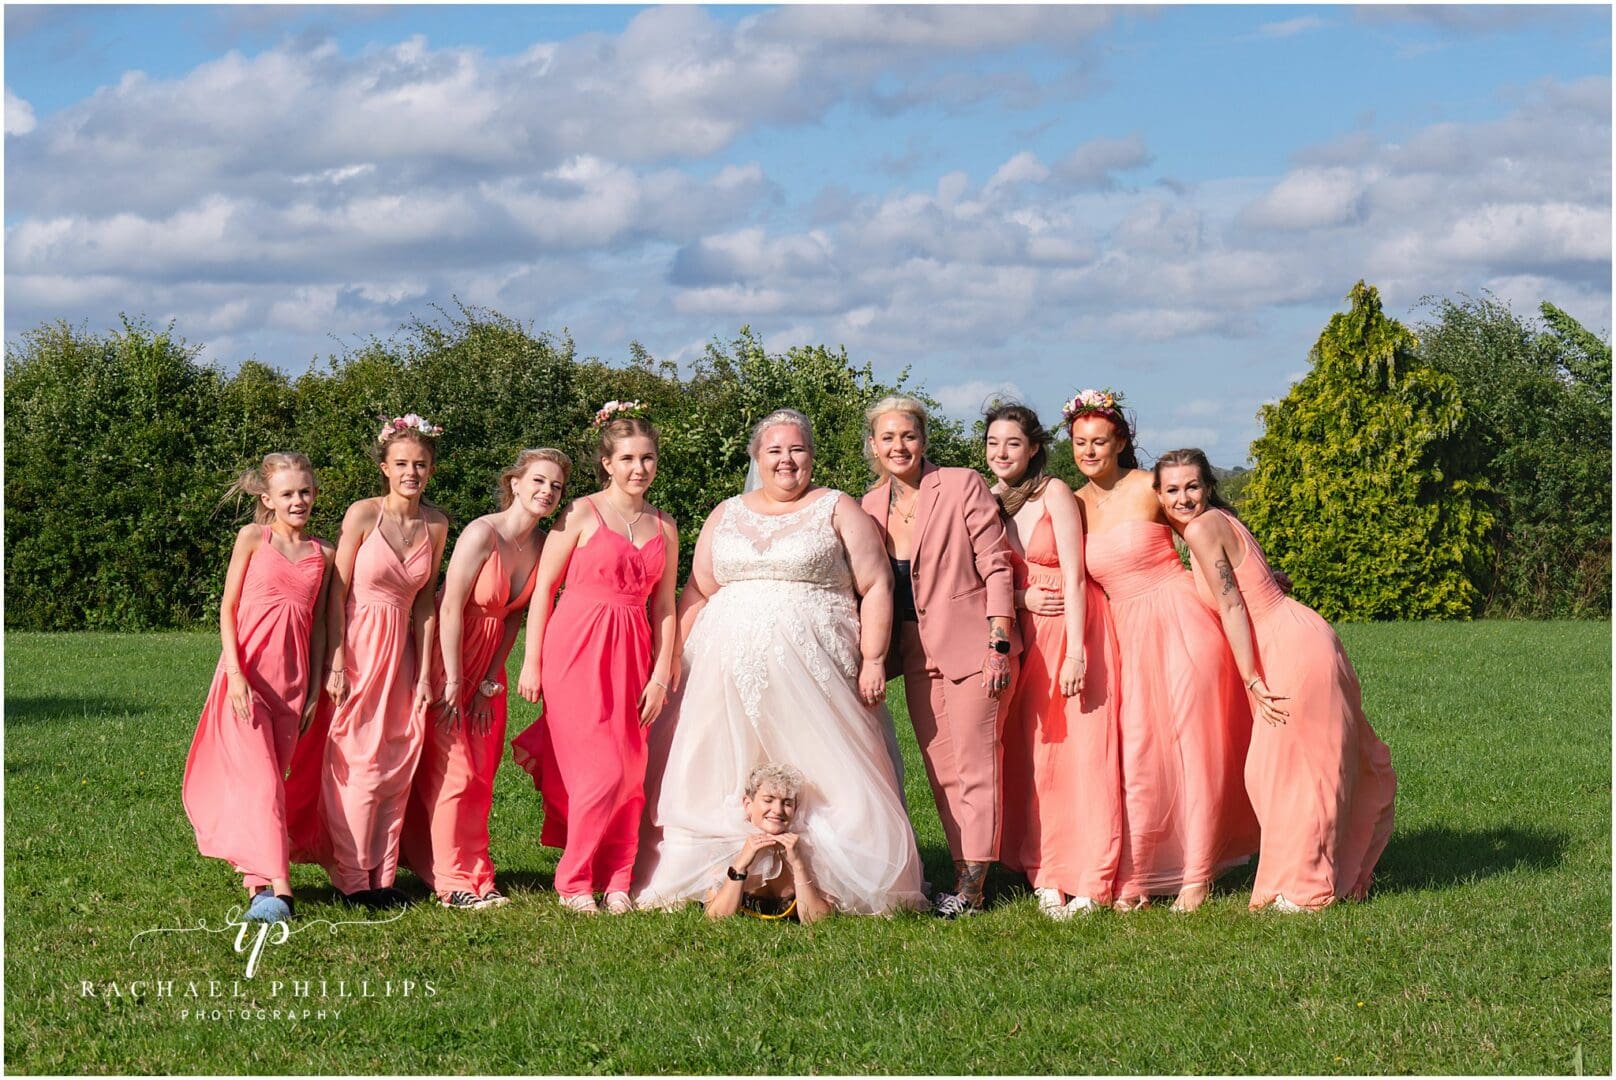 the bridal party looking fantastic, with a funny twist as one of the girls goes under the brides dress